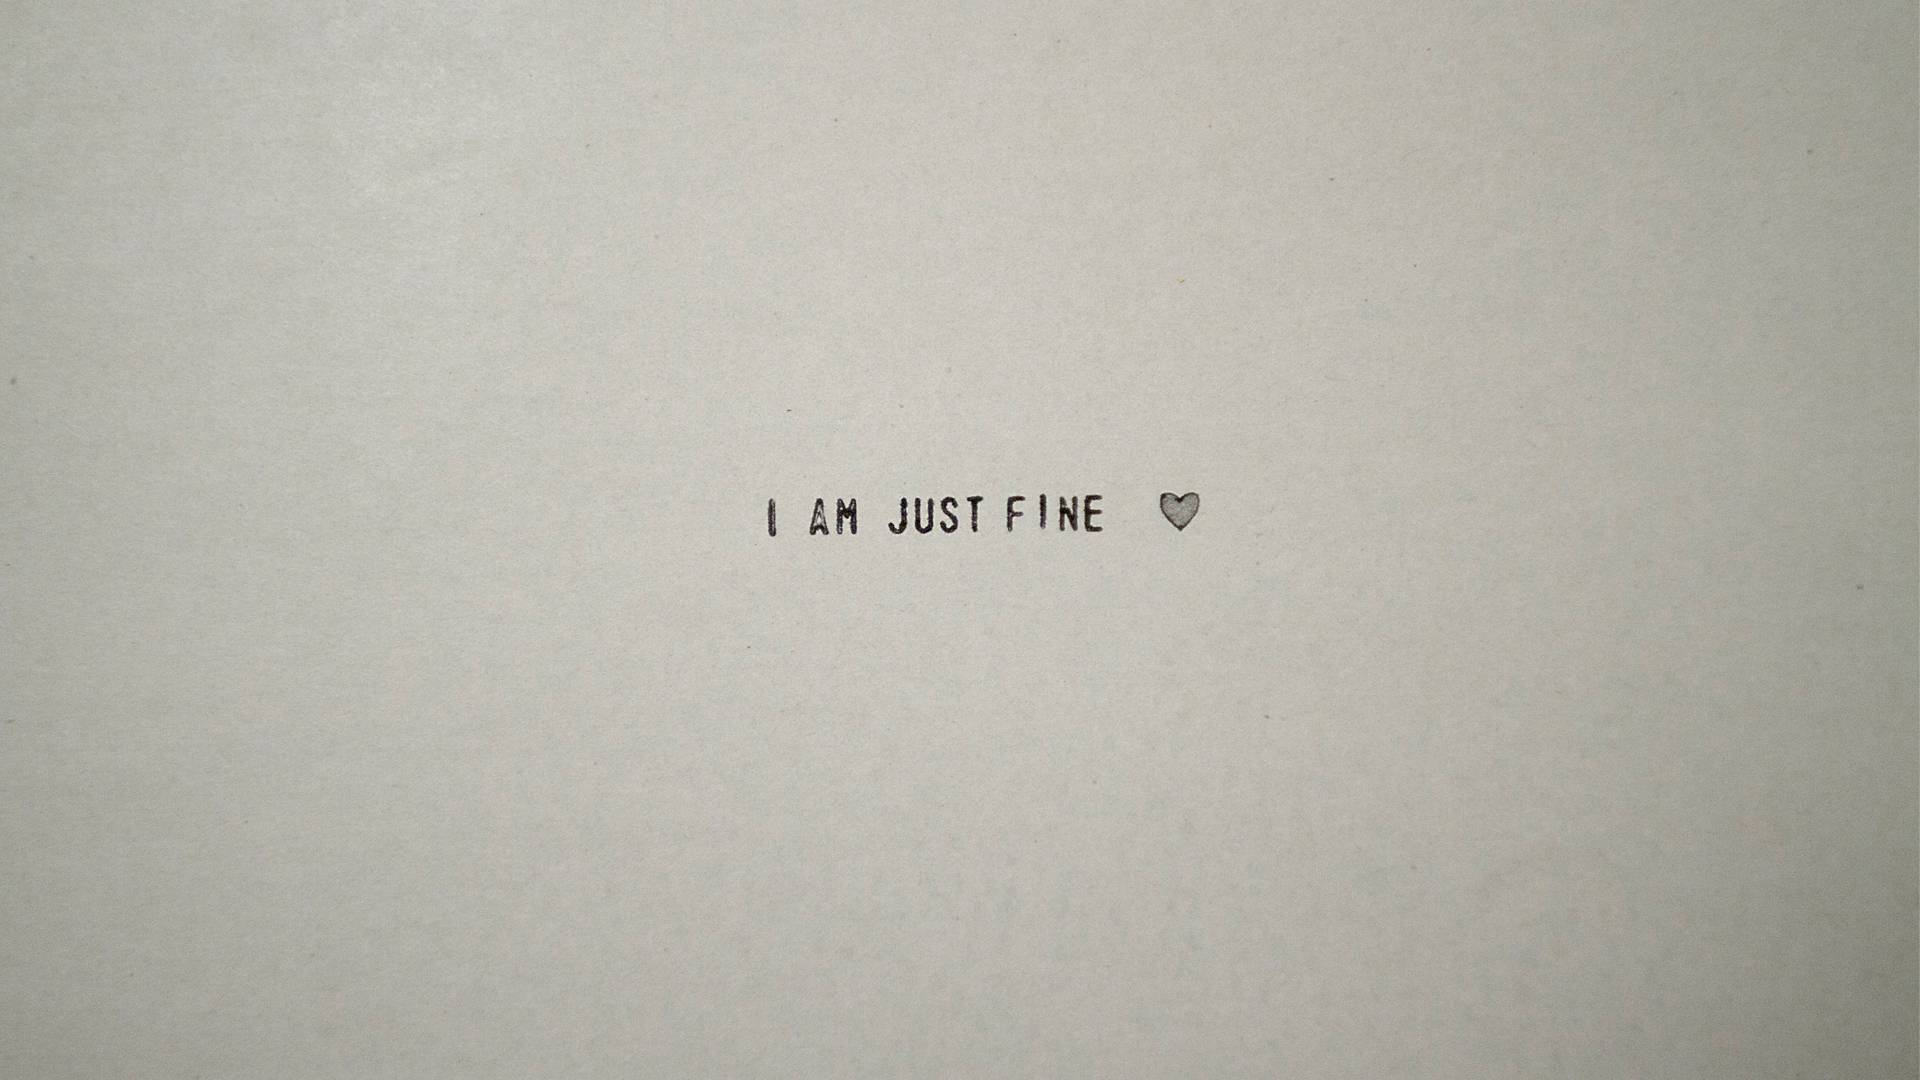 I AM JUST FINE